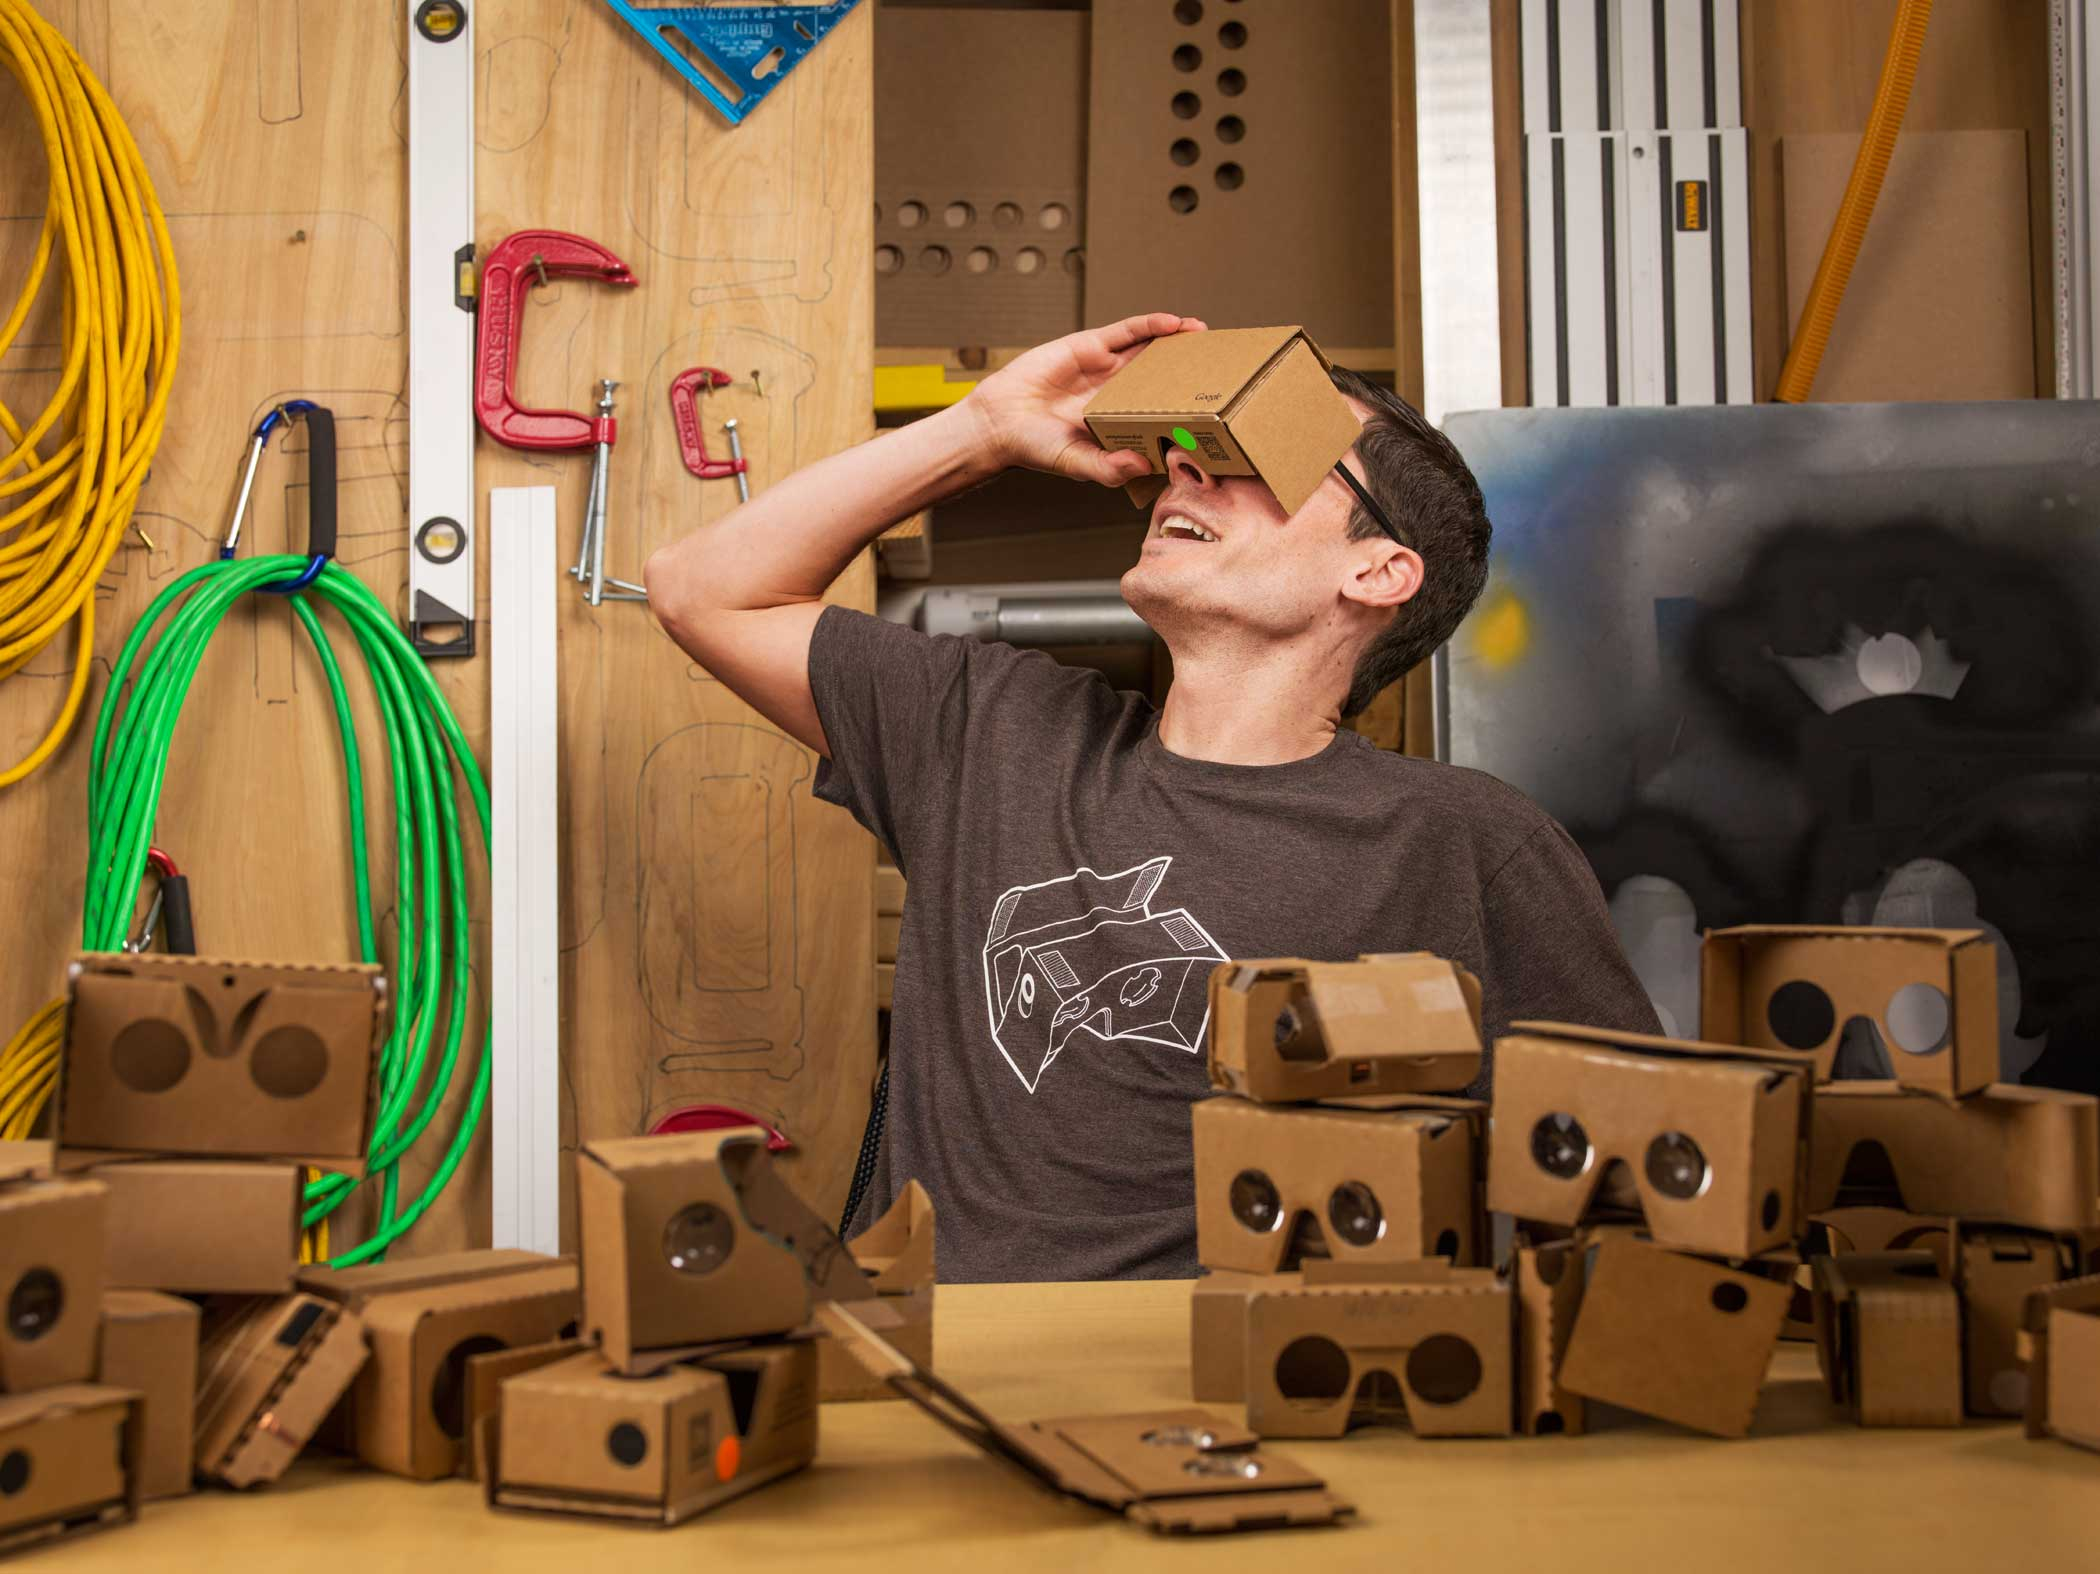 Clay Bavor, Vice President of Product Management at Google, wears a Google Cardboard headset at Google's headquarters in Mountain View, Calif. on June 24, 2015. (Gregg Segal for TIME)